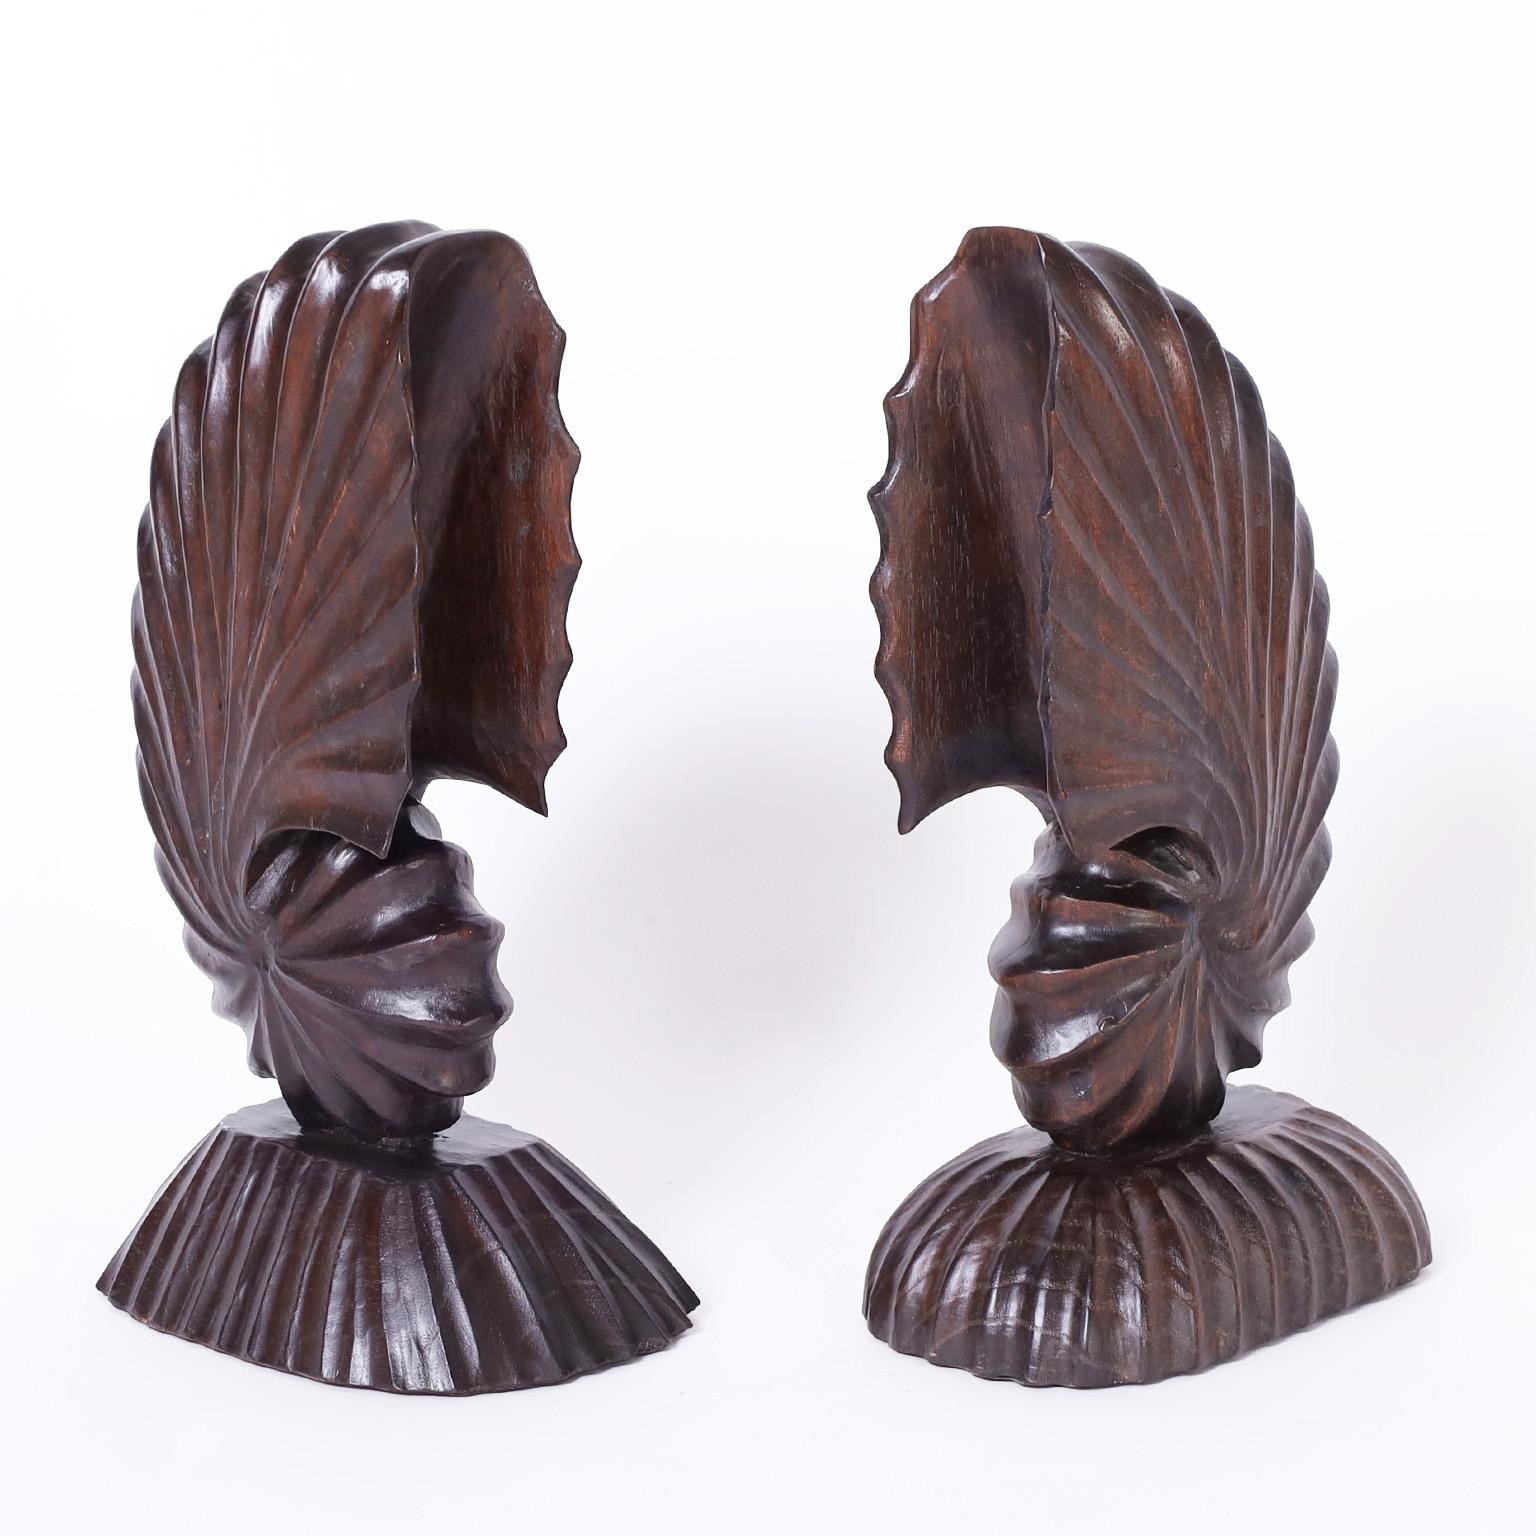 Mid-century nautilus sculptures or objects of art carved from mahogany in a stylized form with a dark lush finish.